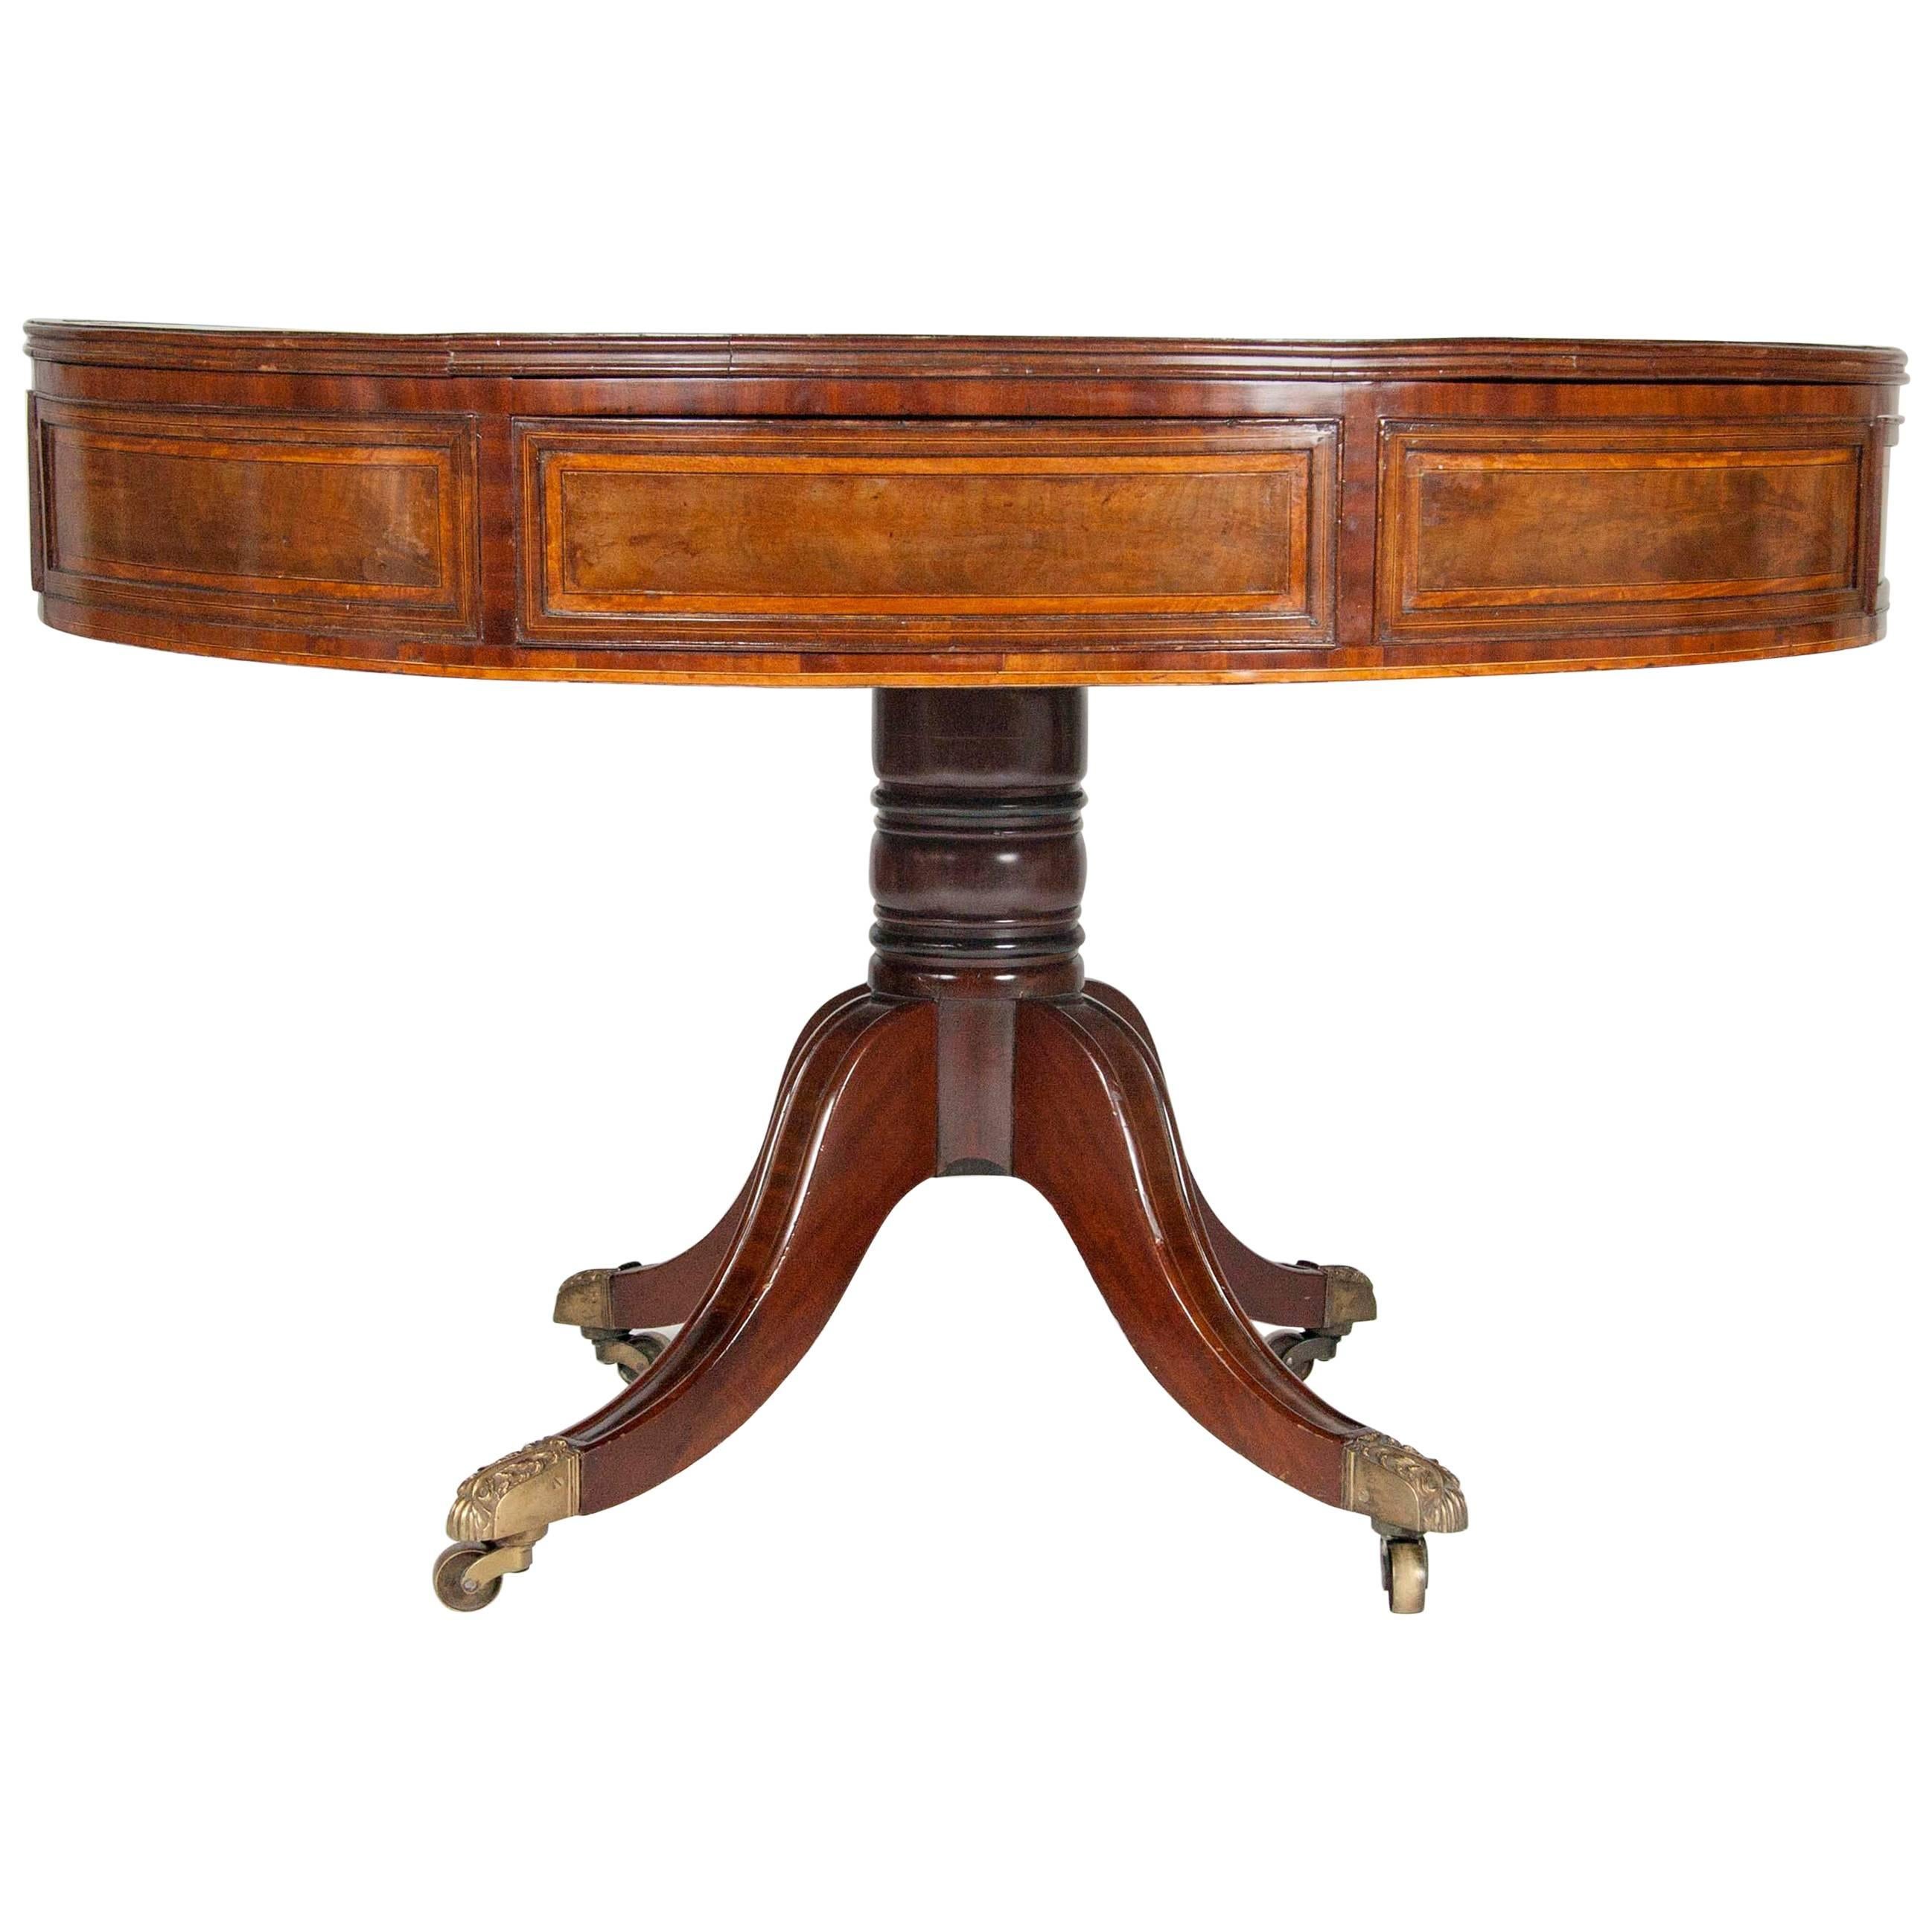 Regency Mahogany and Inlaid Drum Table